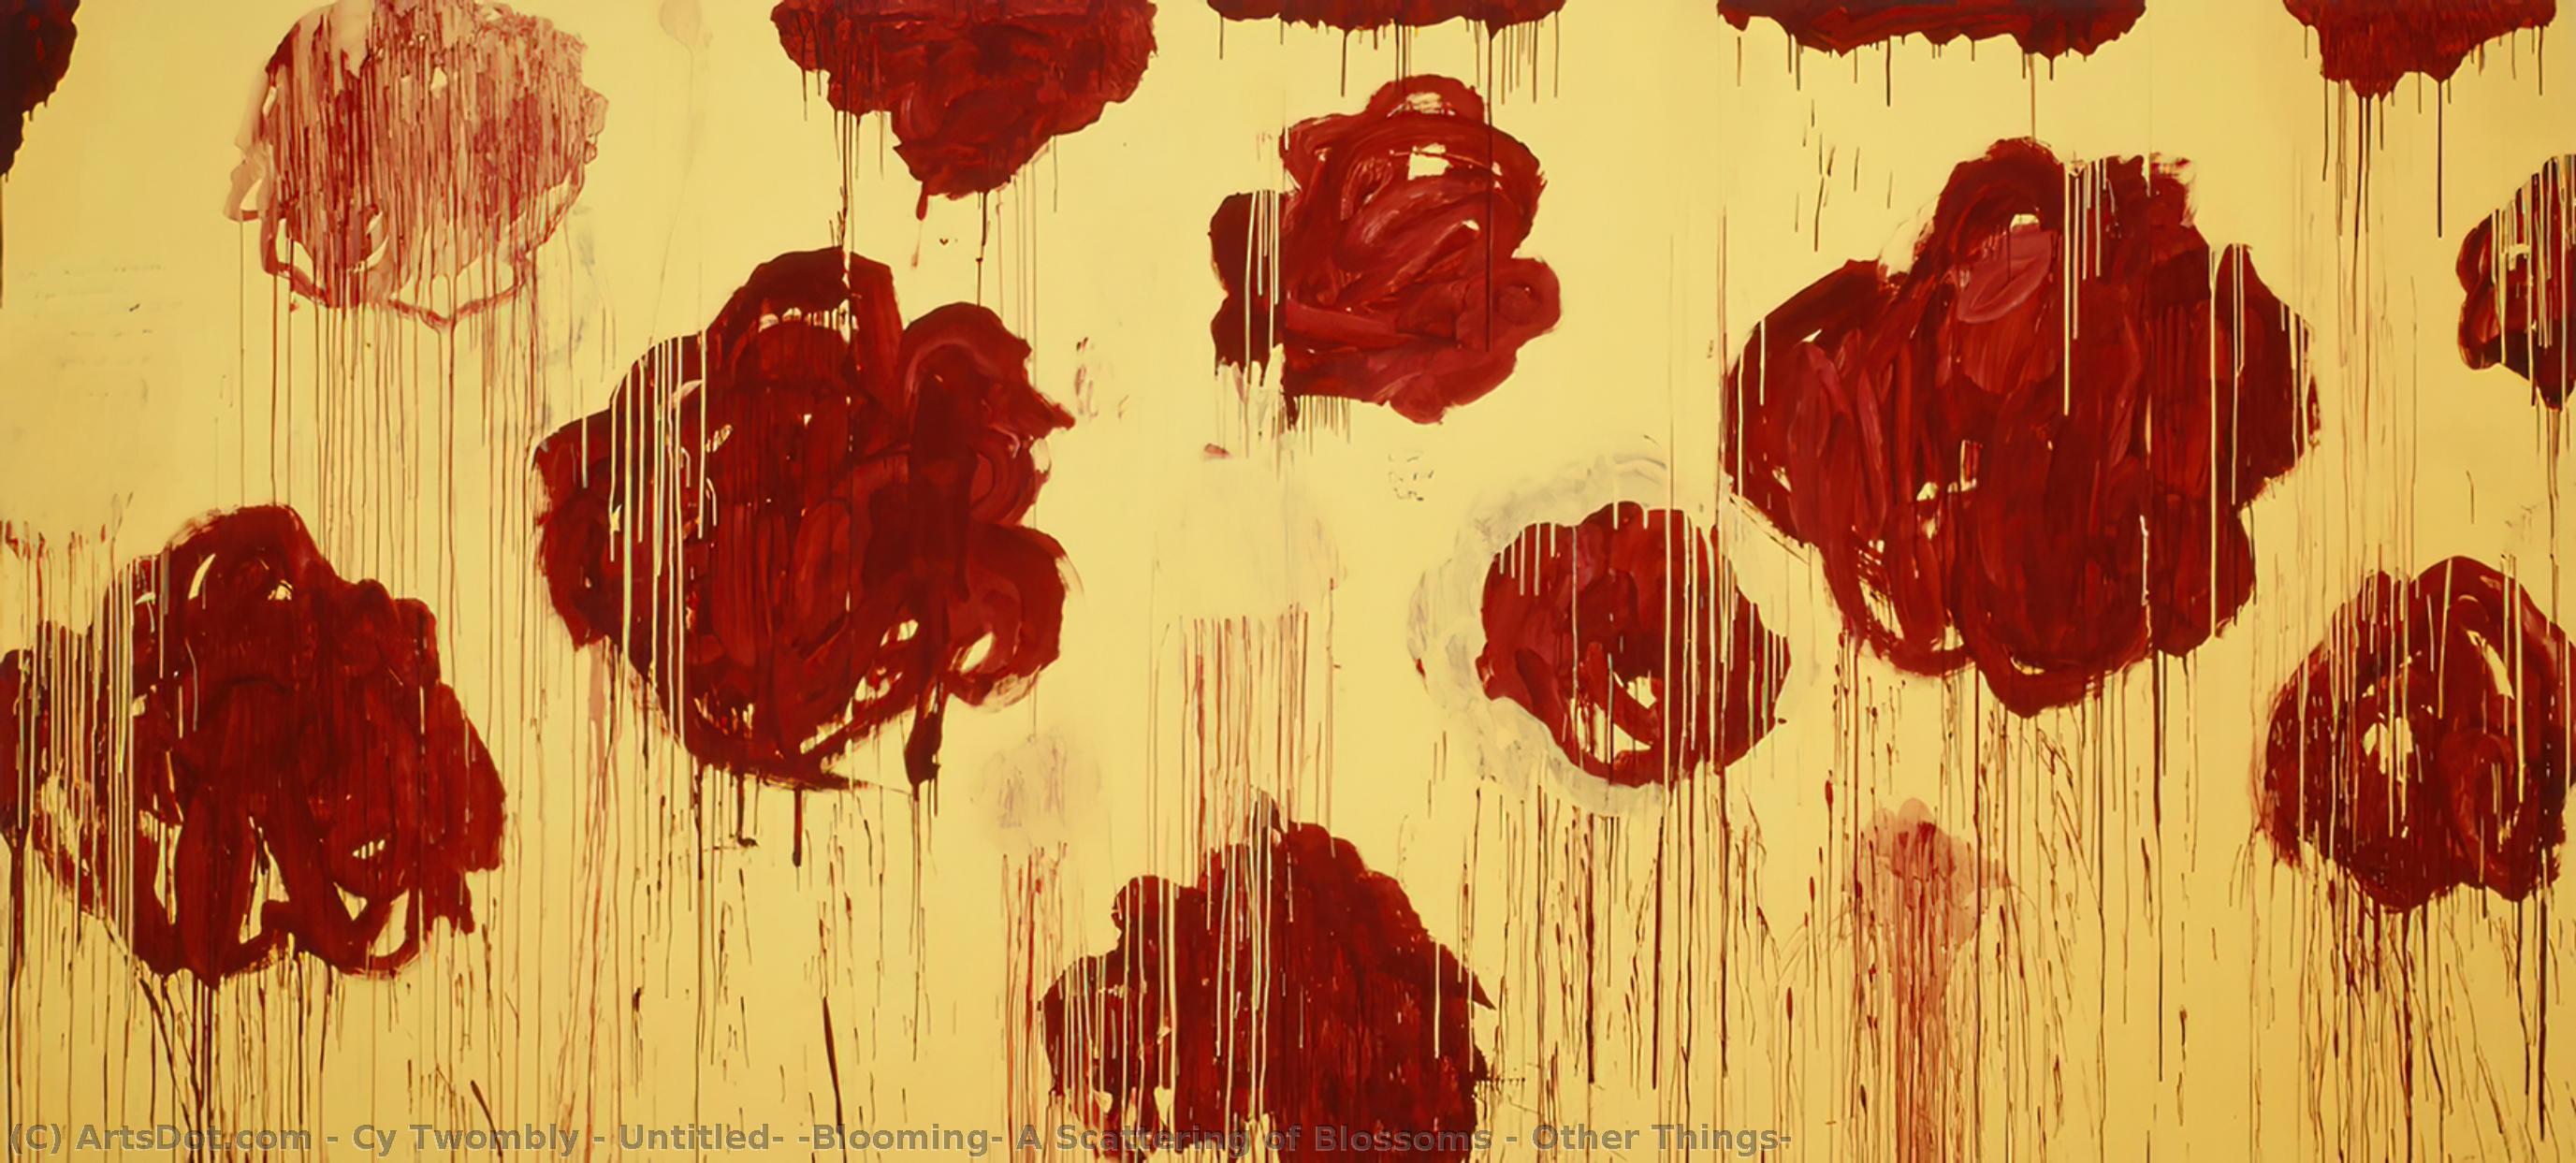 WikiOO.org - Encyclopedia of Fine Arts - Festés, Grafika Cy Twombly - Untitled, (Blooming, A Scattering of Blossoms ^ Other Things)